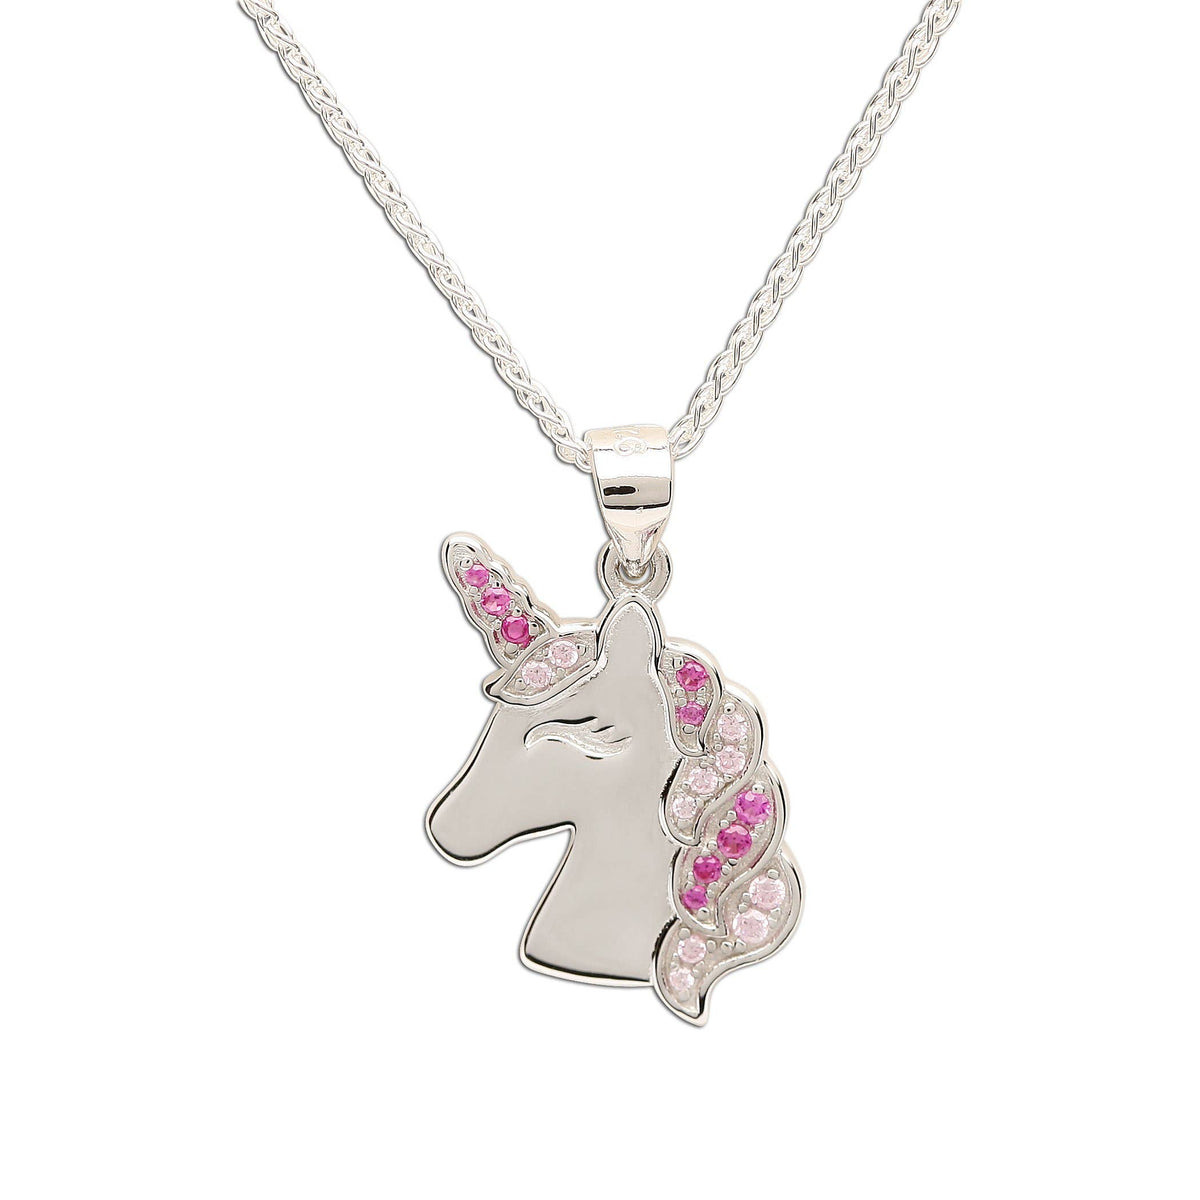 Buy Yuvanta Onion Pink Silver Bling Necklace for Women at